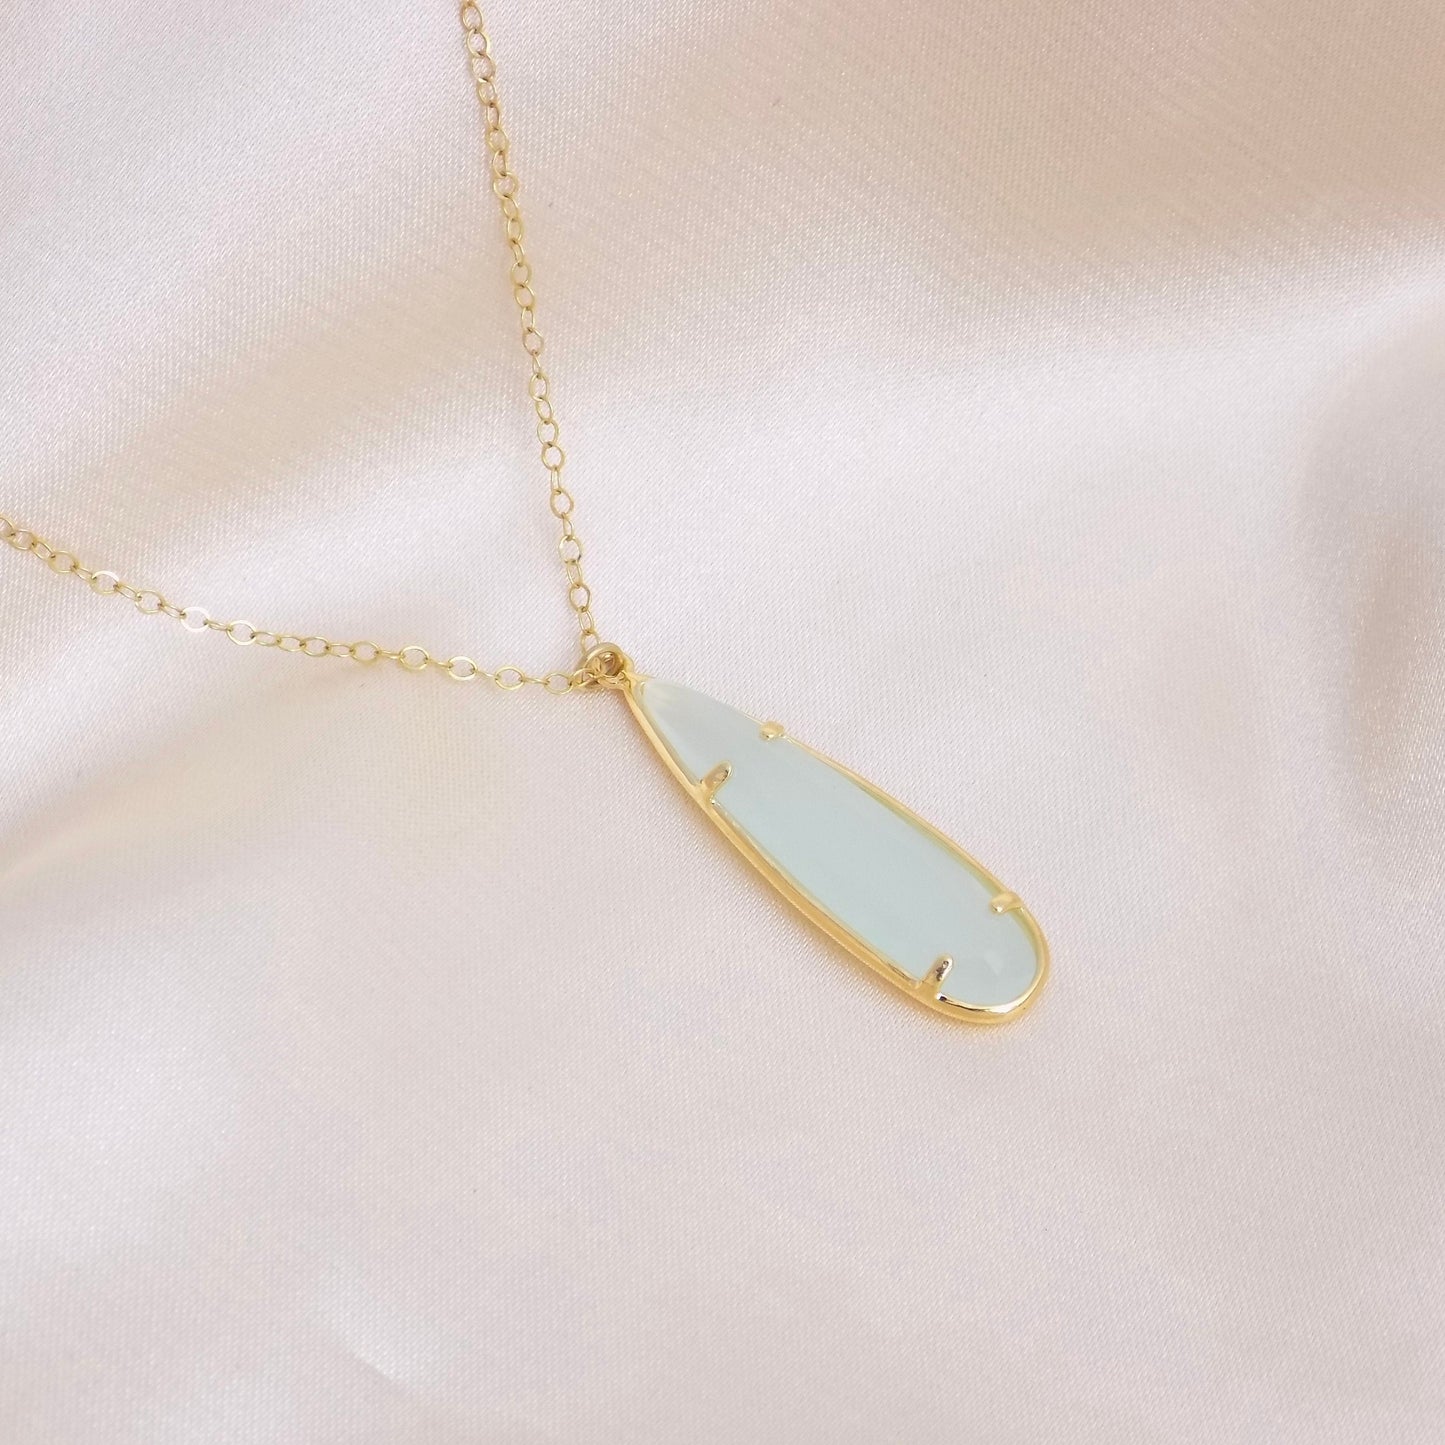 Aqua Chalcedony Gemstone Necklace Gold, Sea Foam Chalcedony Pendant, Christmas Gifts For Her, M6-122